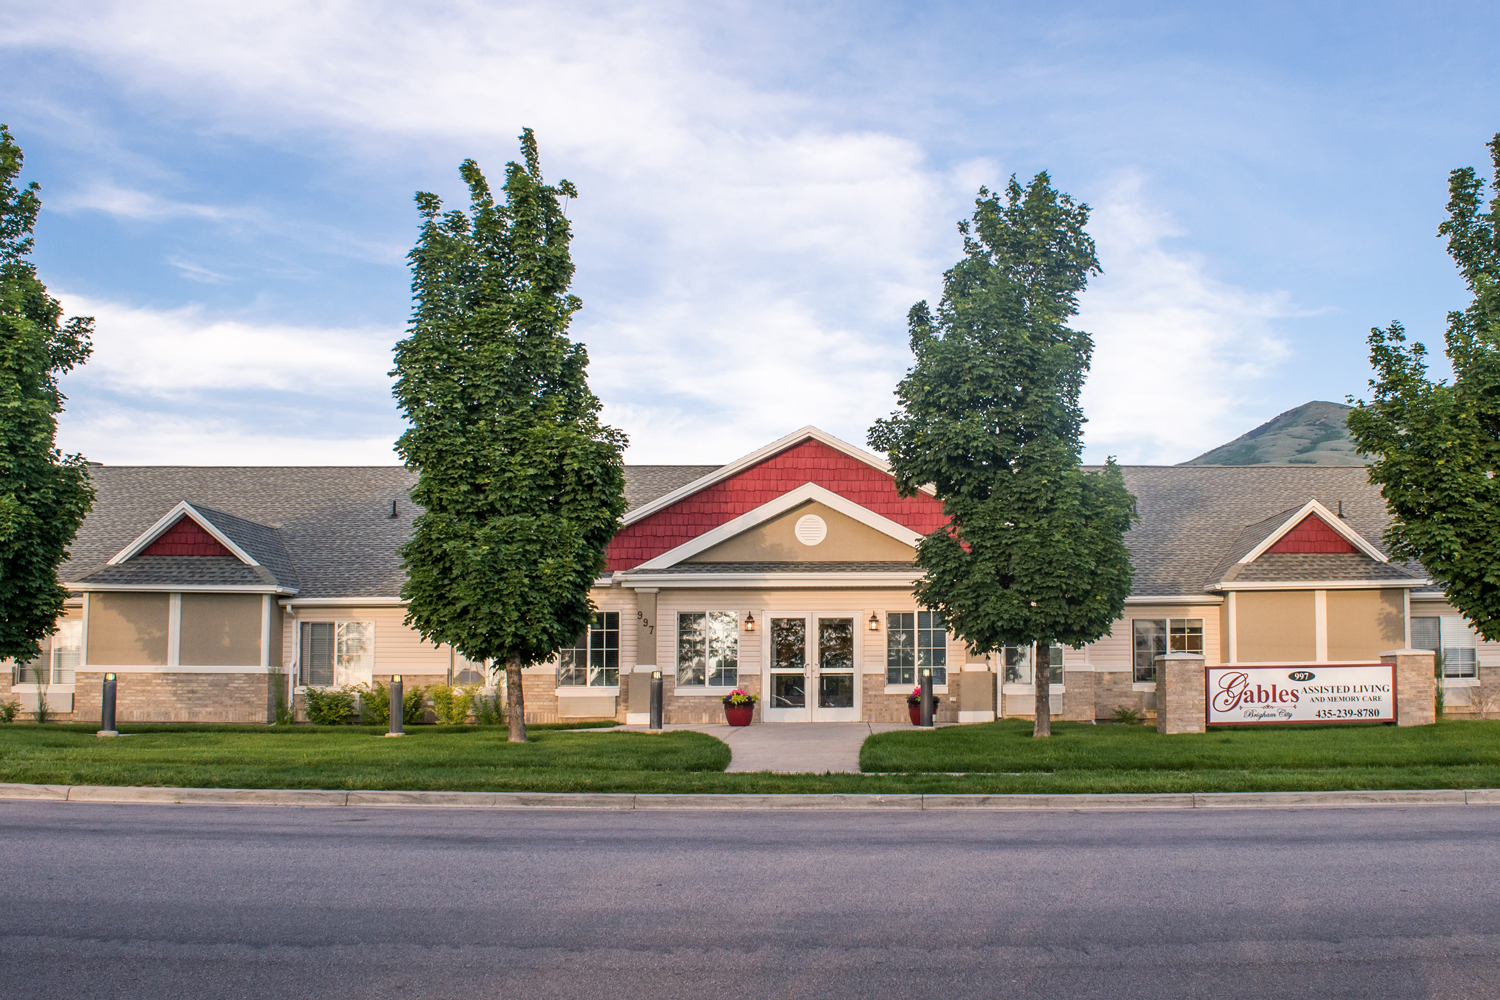 The Gables of Brigham City Assisted Living